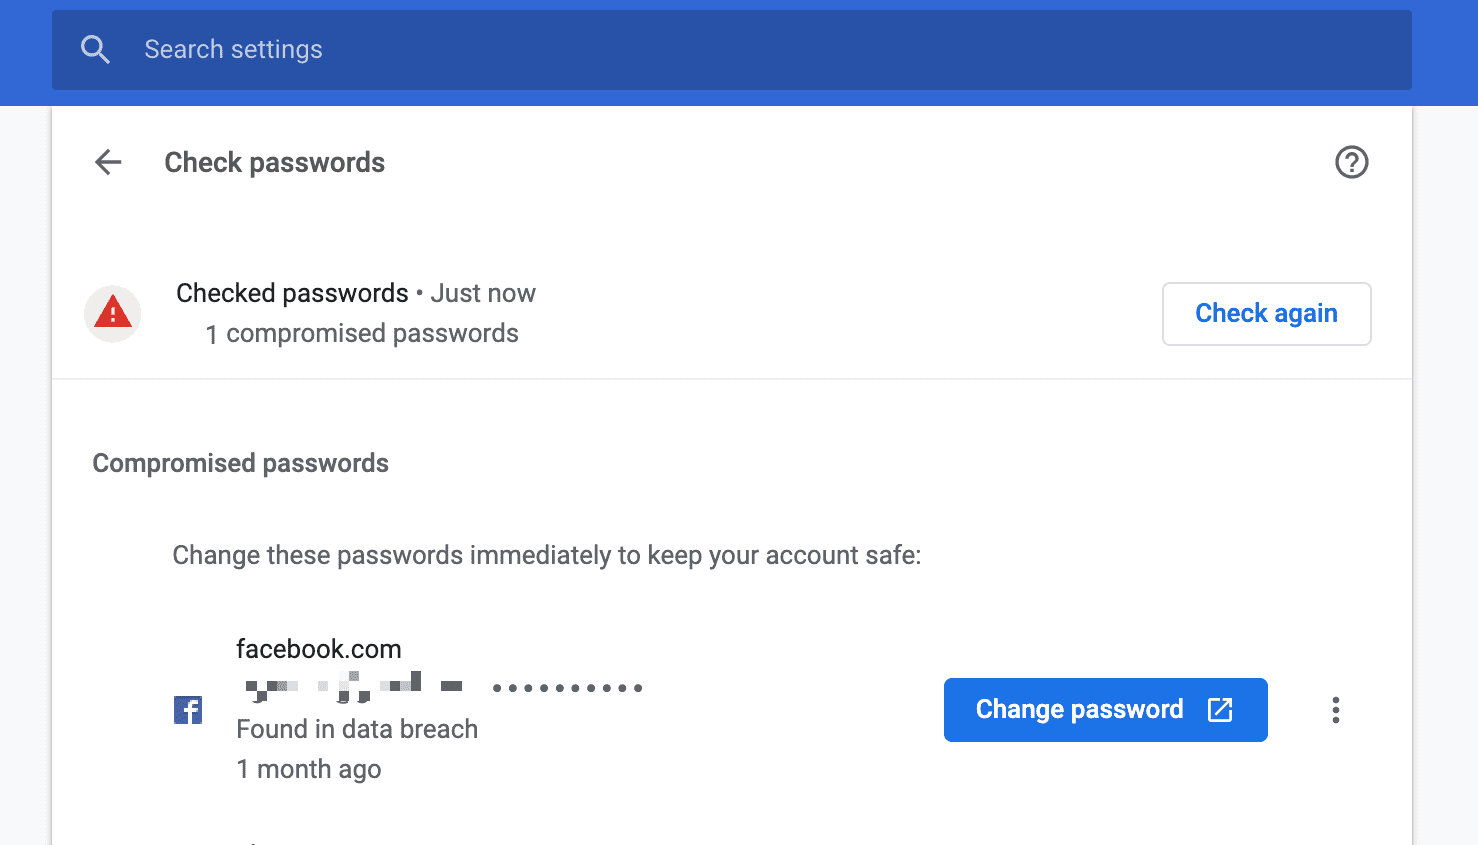 Chrome 86 to feature improved password reset capabilities